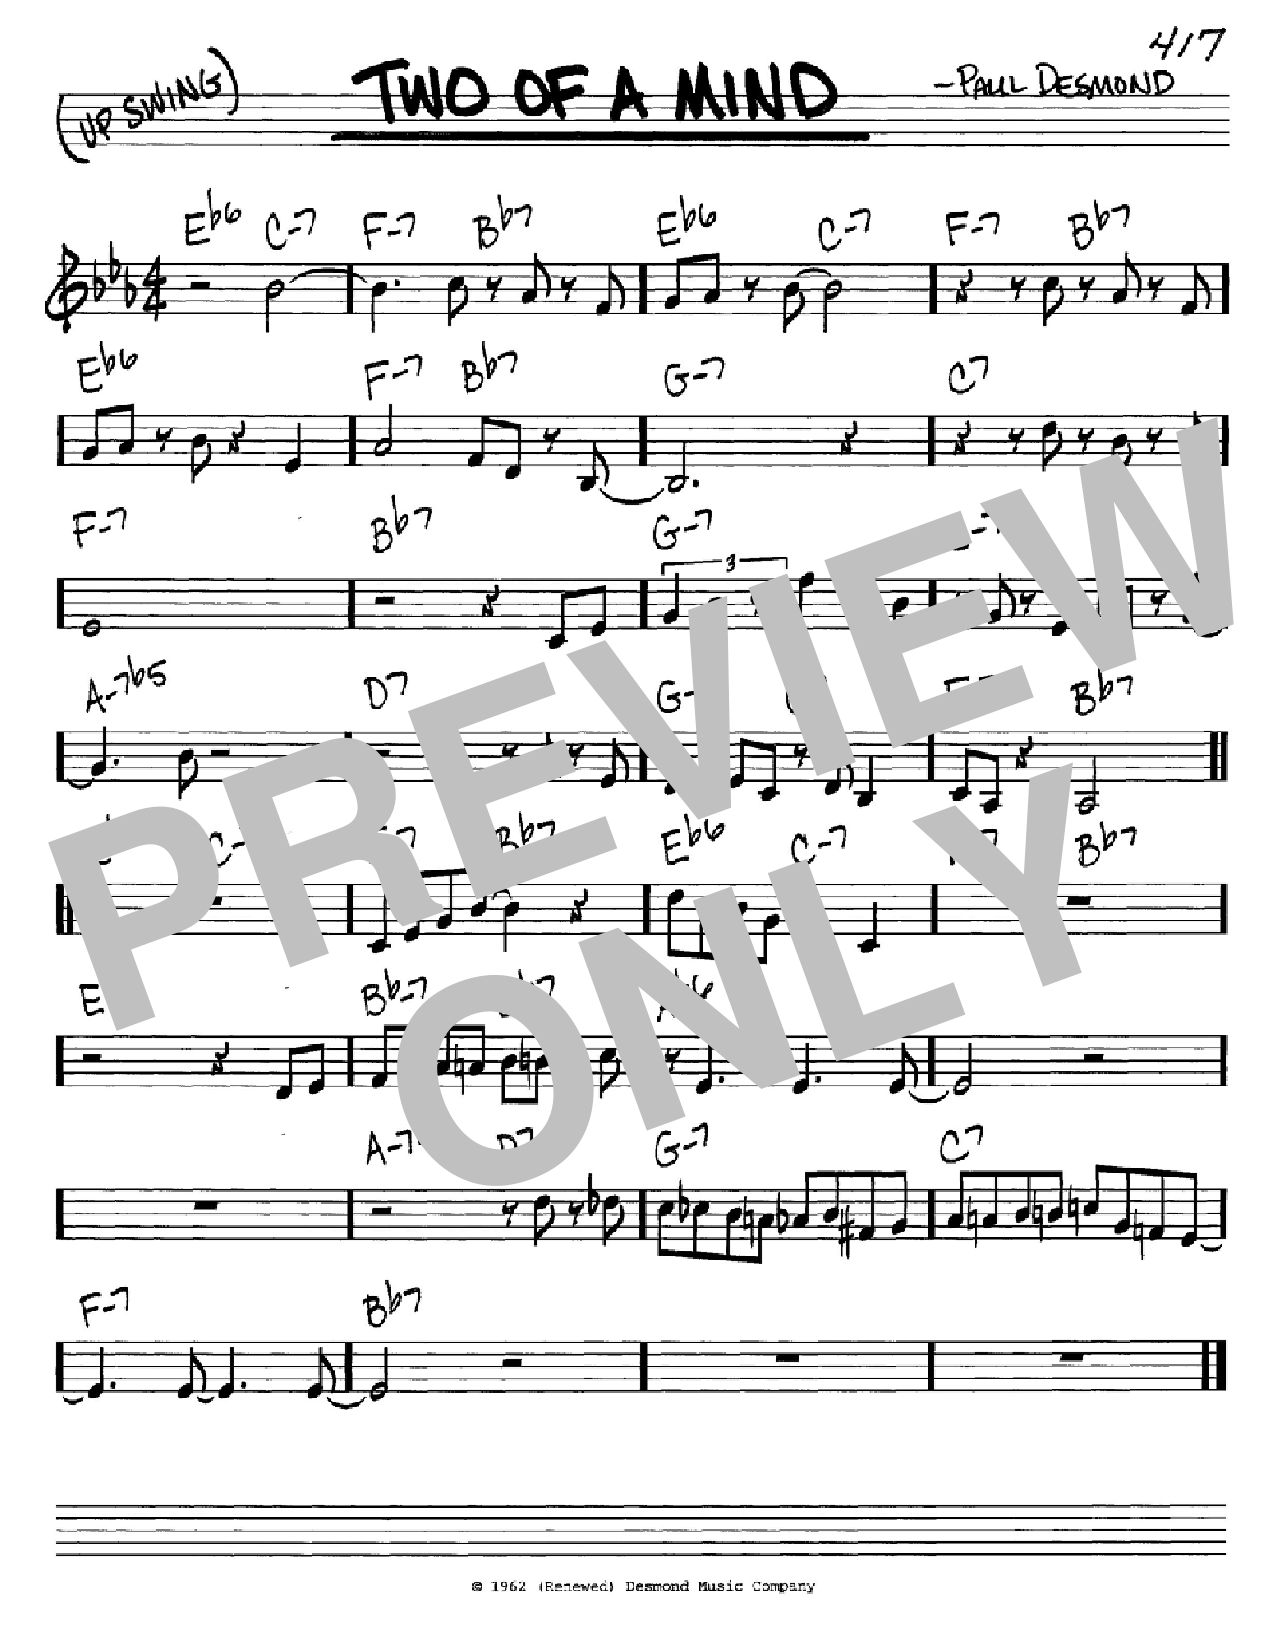 Download Paul Desmond Two Of A Mind Sheet Music